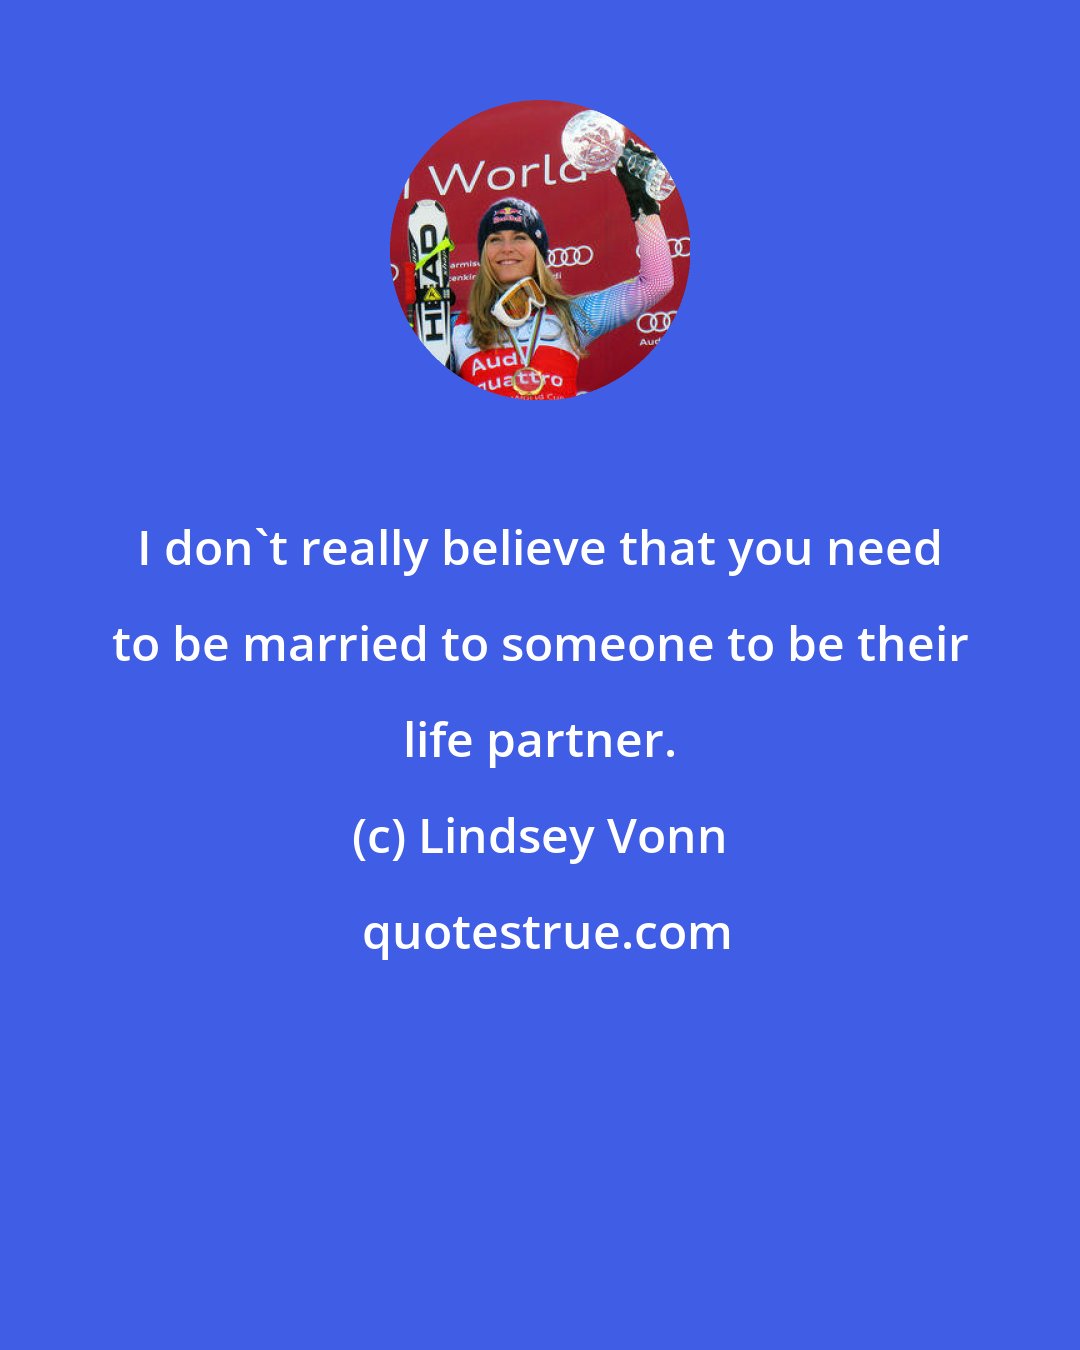 Lindsey Vonn: I don't really believe that you need to be married to someone to be their life partner.